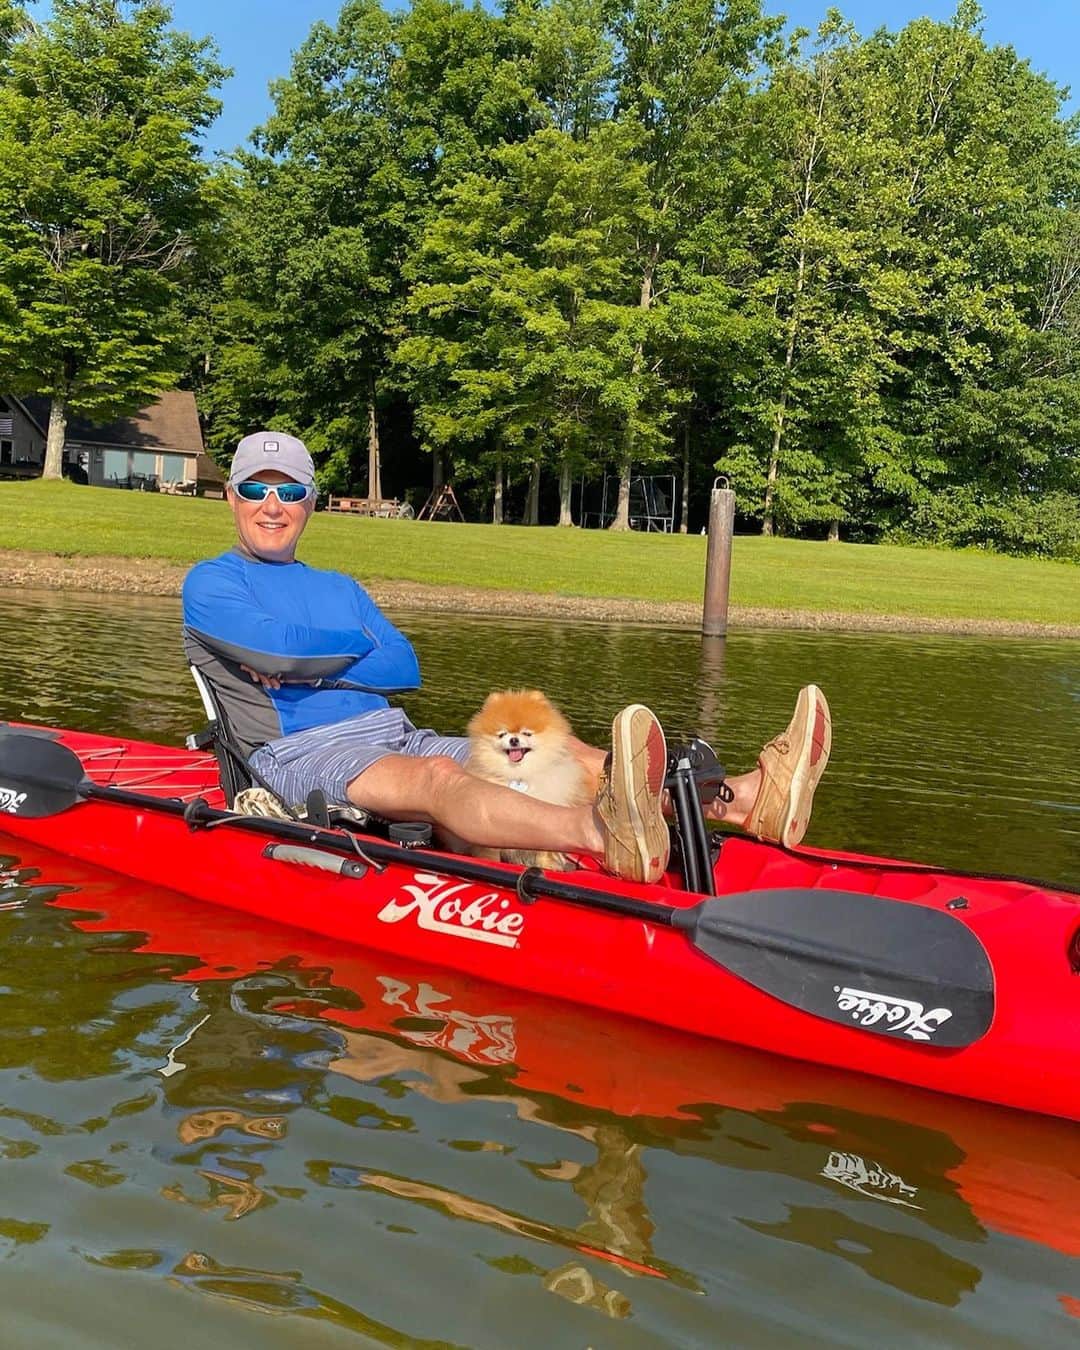 Monique&Gingerのインスタグラム：「Ginger absolutely adores her daddy👨🏻💙and totally loves going for kayak rides with him🐶🚣🏻‍♂️ Happy Father’s Day to all the dads out there! Hope you have an awesome day☀️❤️」